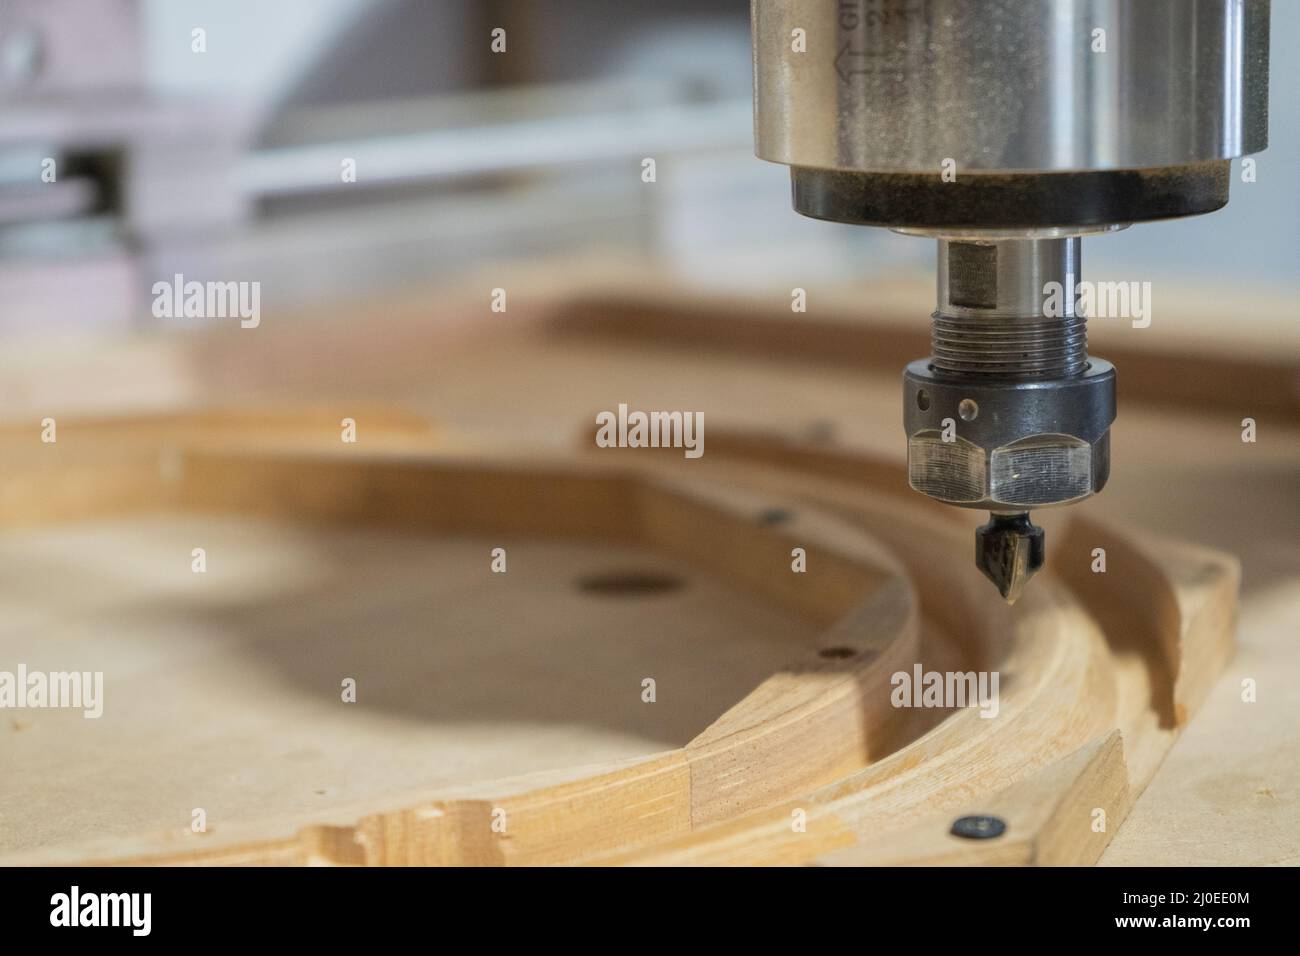 cnc router at work in the workshop making a wooden steering wheel for a classic car Stock Photo